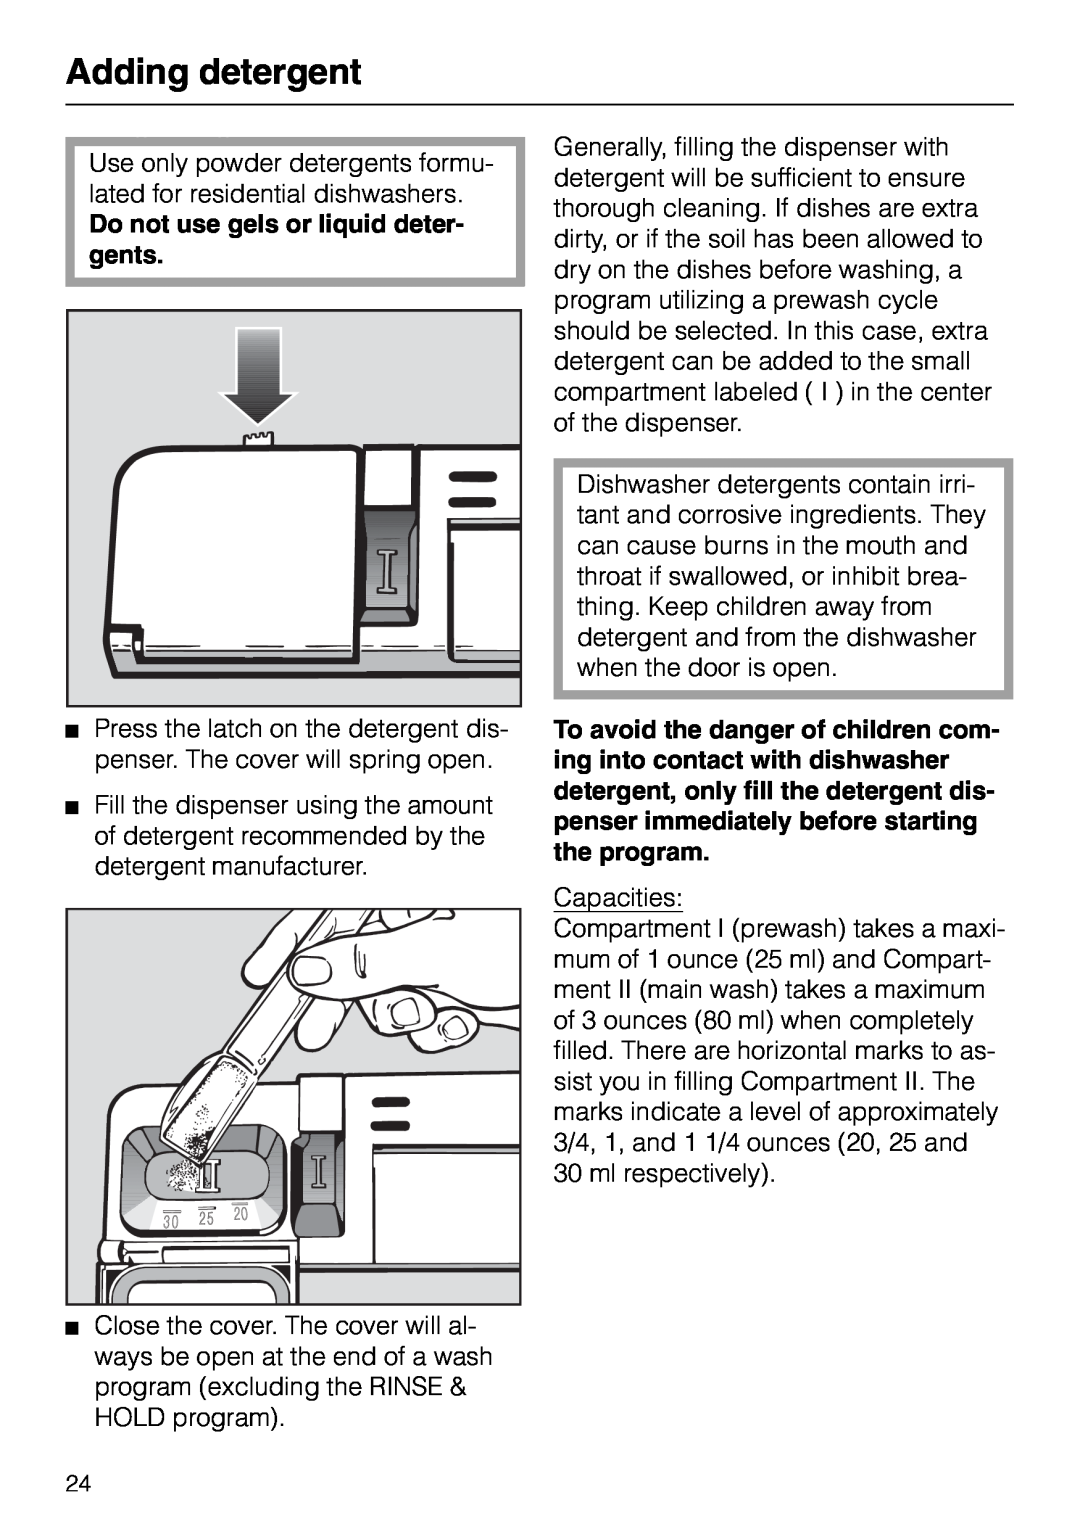 Miele M.-NR. 04 390 922 operating instructions Adding detergent, Do not use gels or liquid deter- gents 